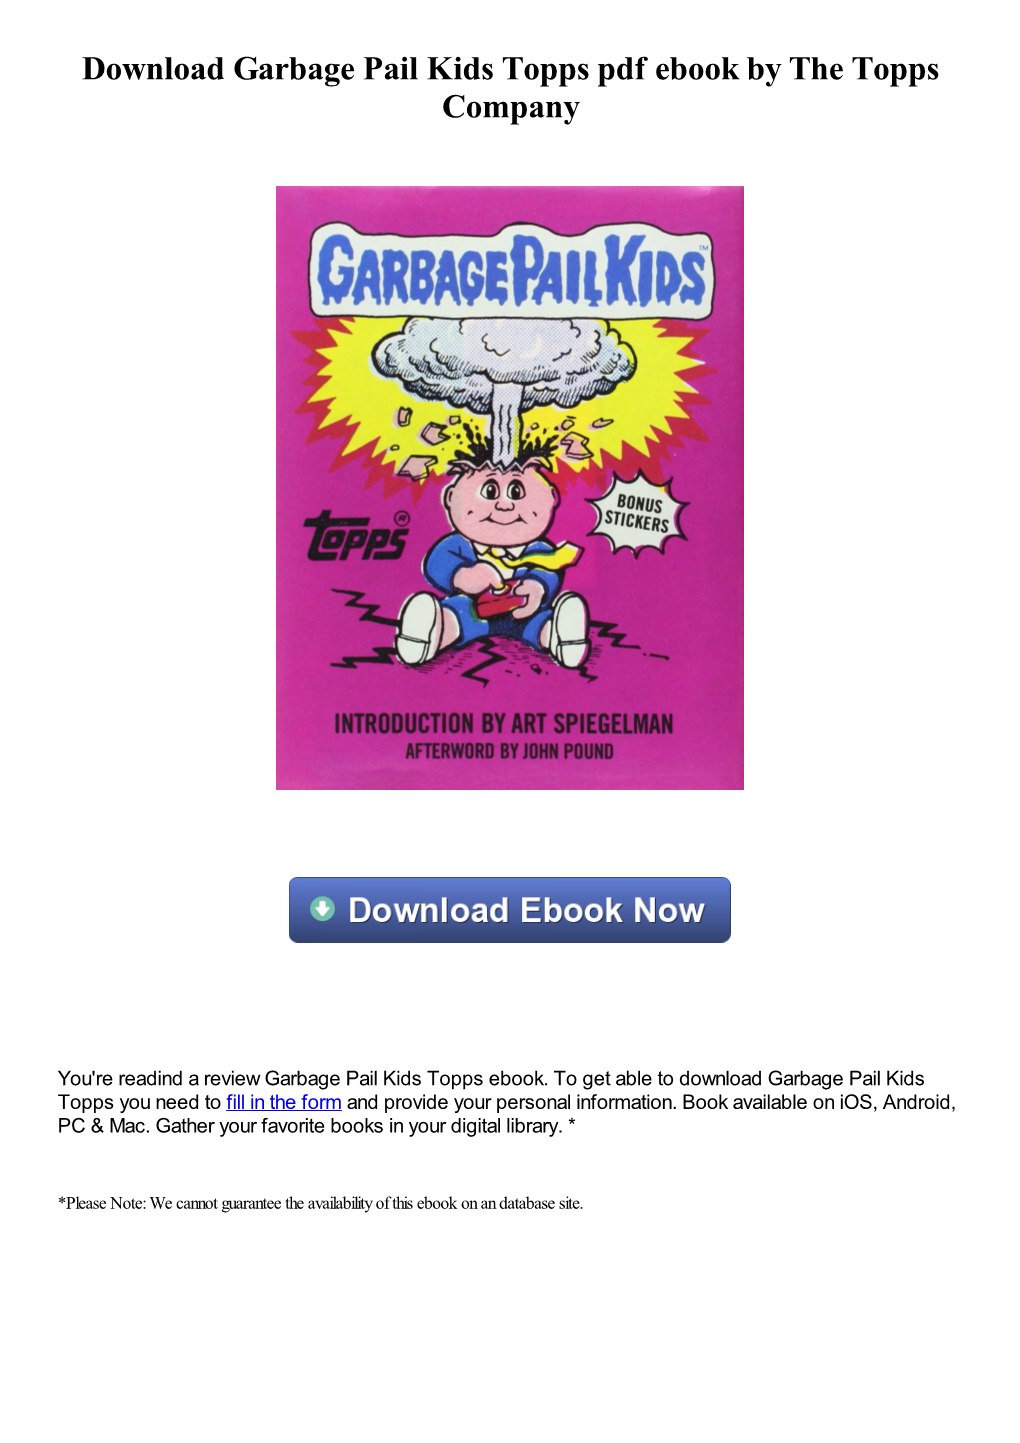 Garbage Pail Kids Topps Pdf Ebook by the Topps Company